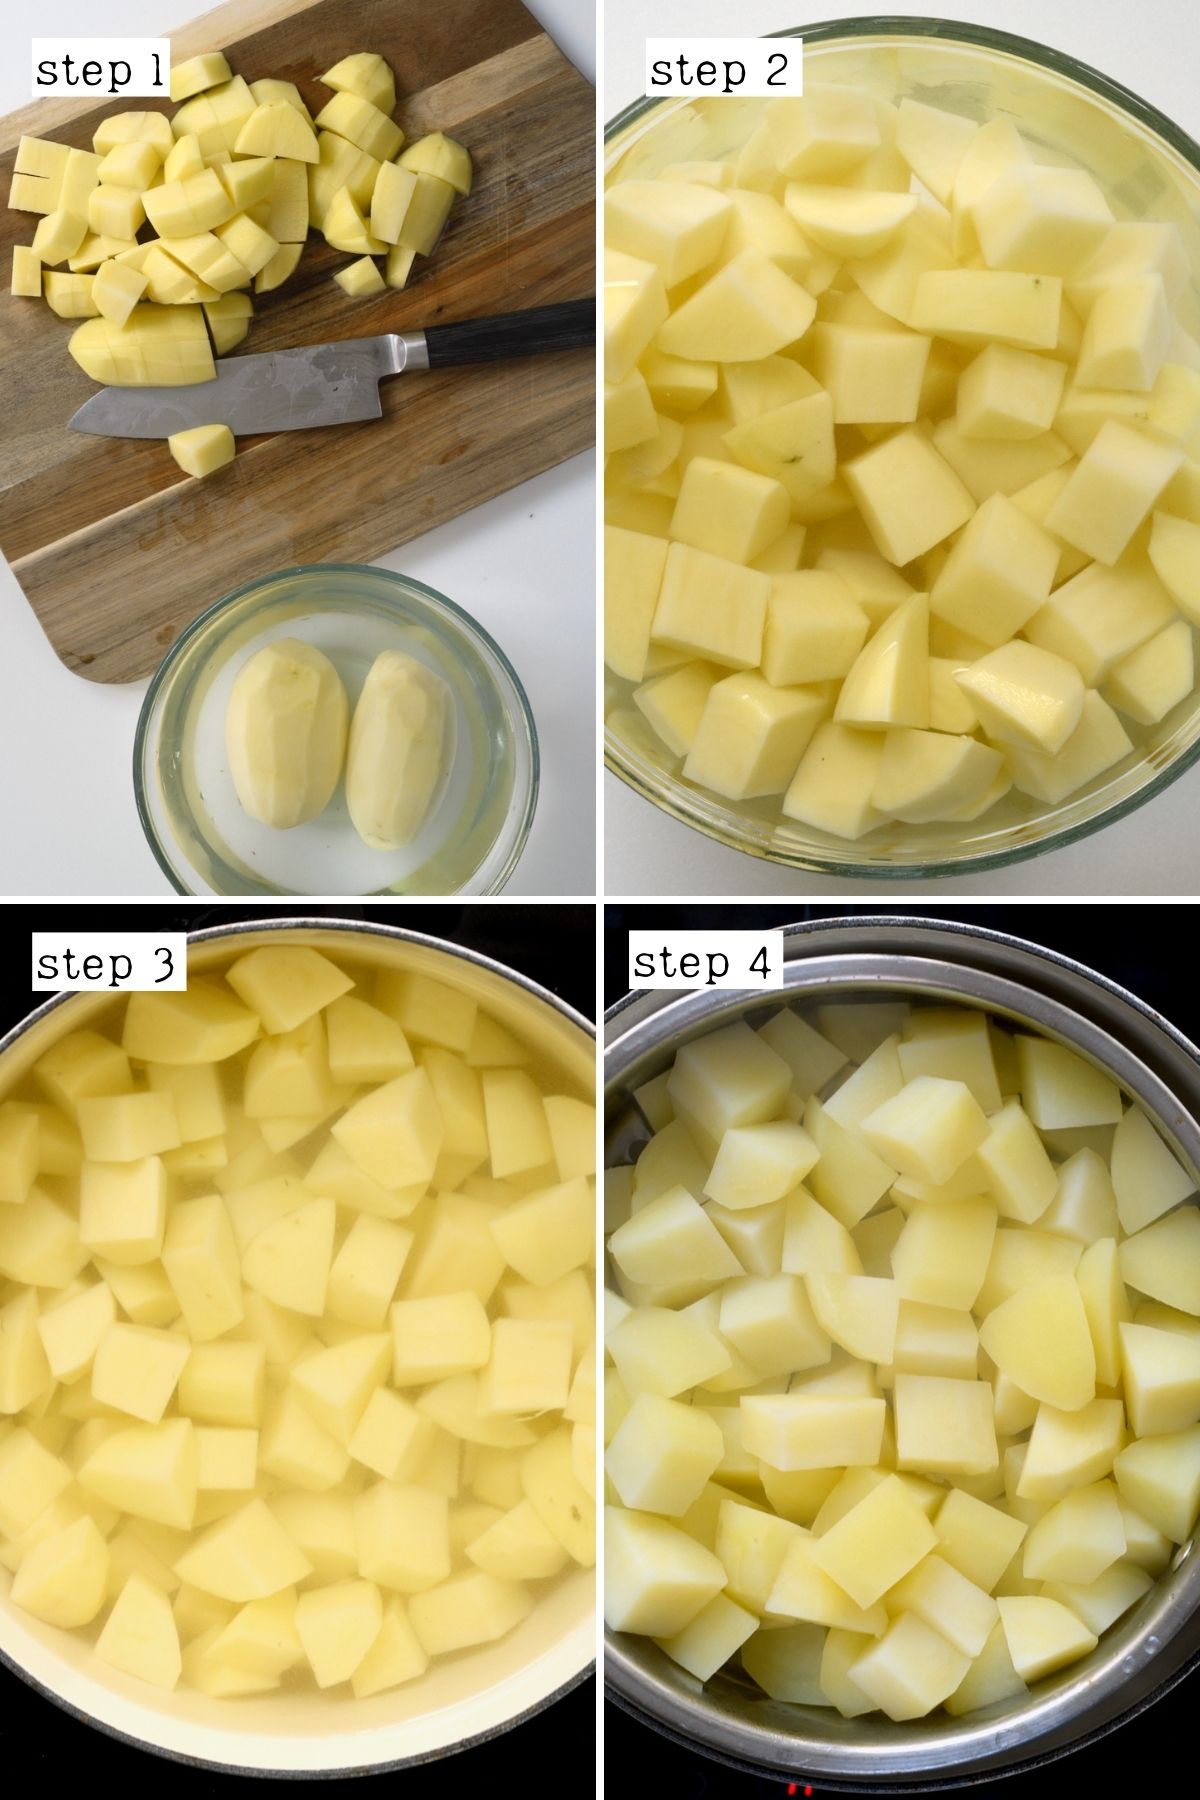 Steps for boiling chopped potatoes